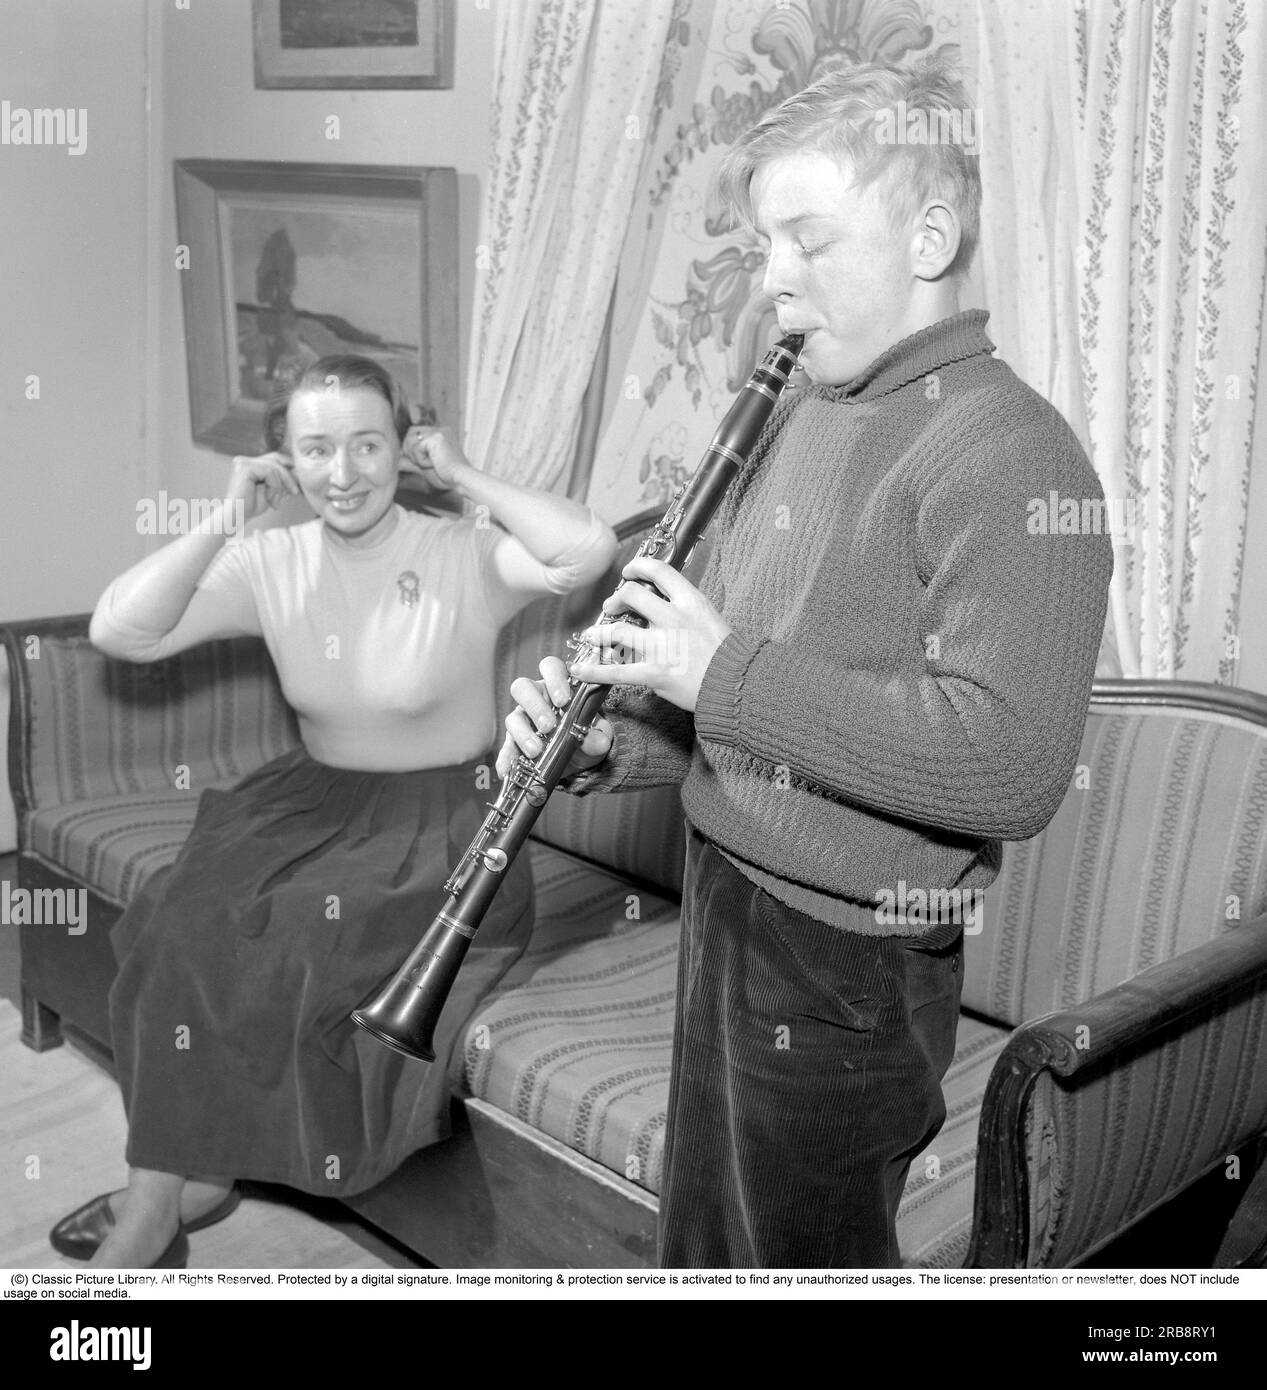 At Rune Lindström's home (1916-1973)  Swedish screenwriter and actor.  Here his wife with their son in a picture taken in their home in Leksand in 1958. Sweden. He is seen happily playing his clarinet thinking it sounds good but judging by his mother's reaction and her fingers in her ears as if to protect herself from the noise, the playing does not sound good. Conard ref 3672 Stock Photo